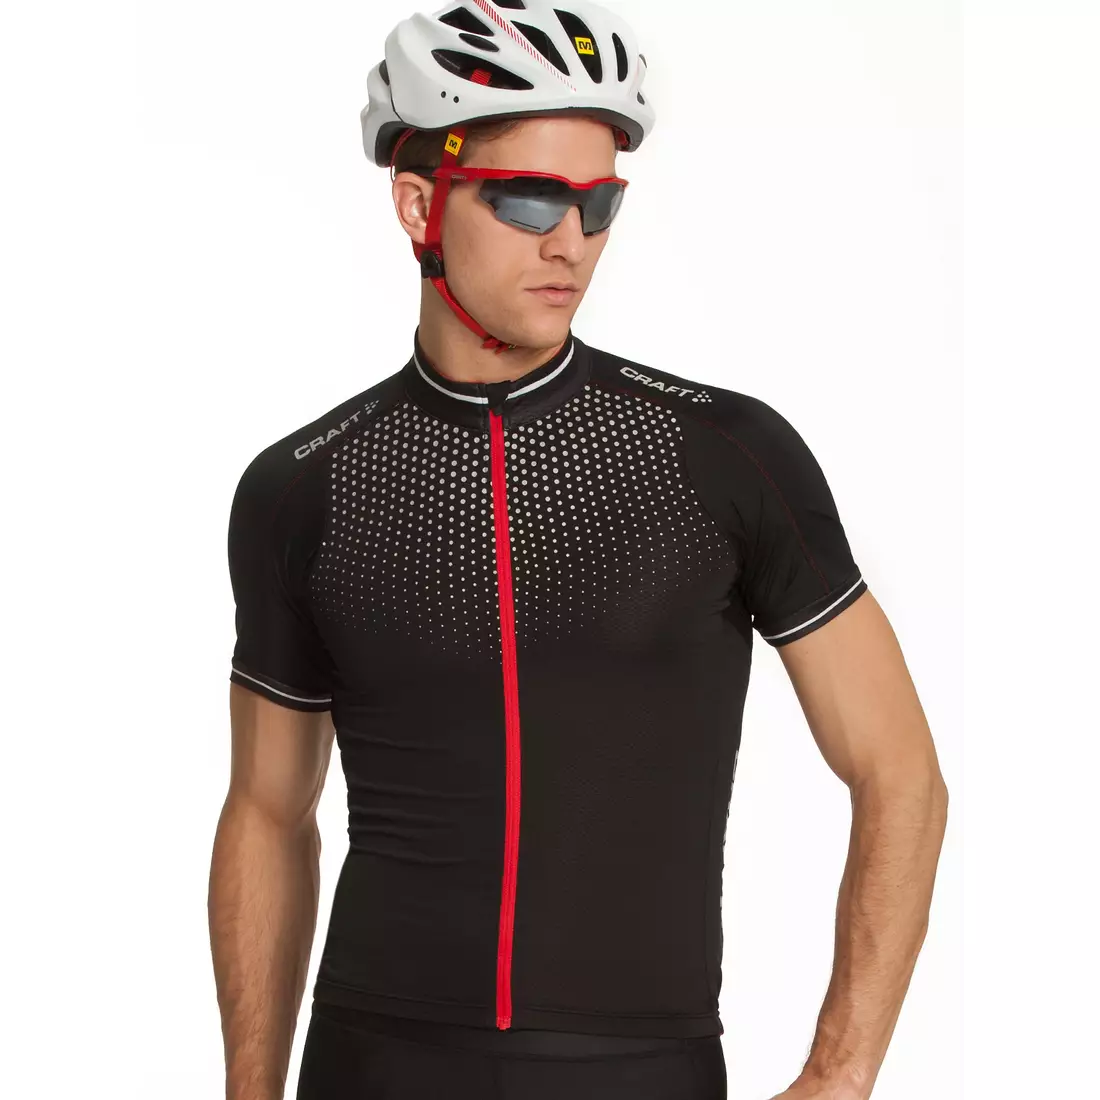 CRAFT Performance Glow men's cycling jersey 1902581-9430